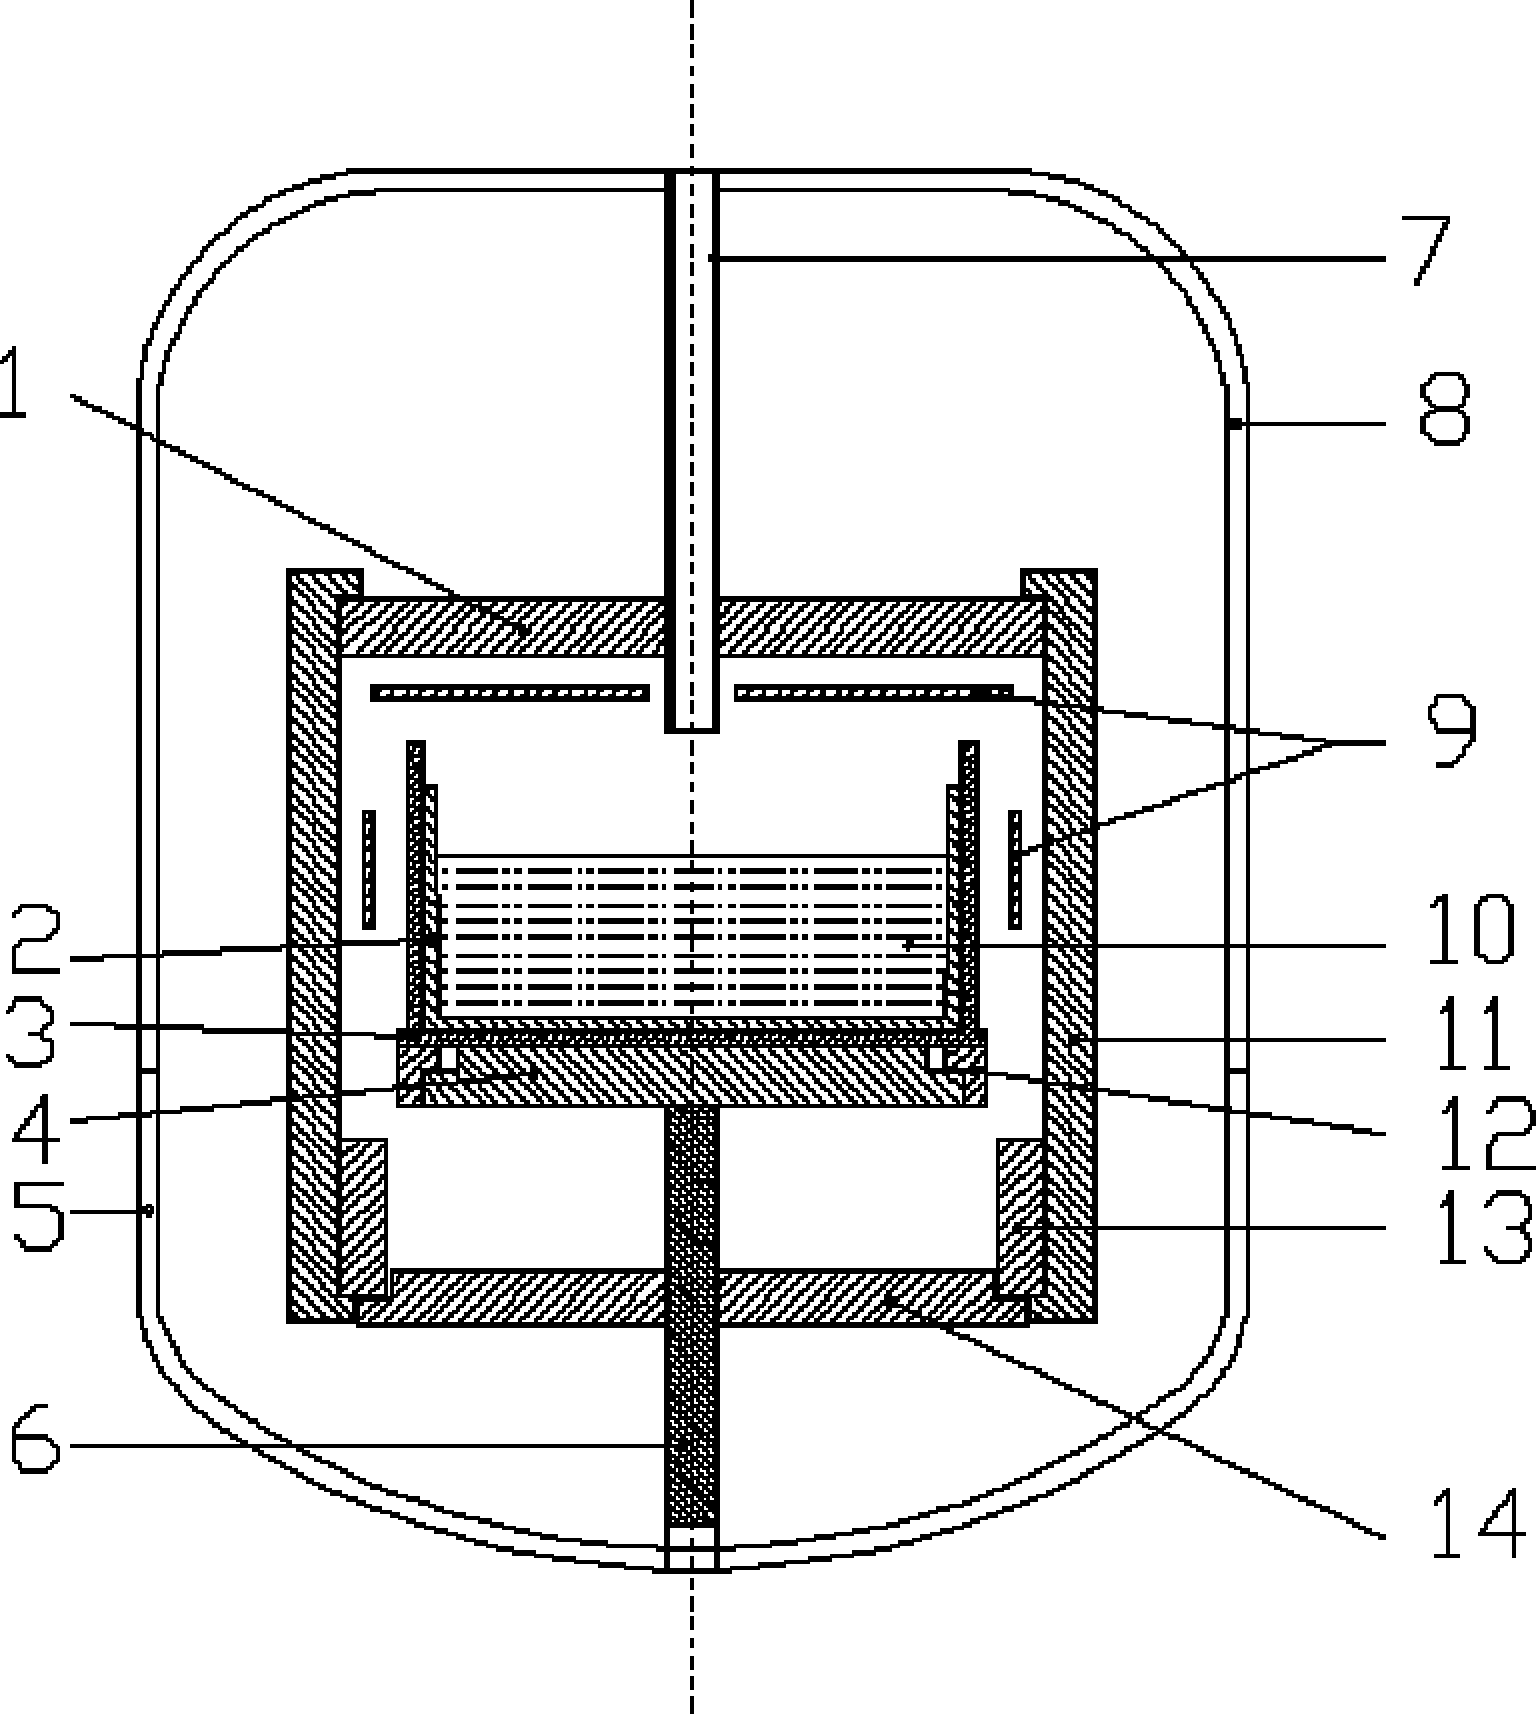 Thermal field structure used in polycrystalline silicon ingot furnace for controlling crystal growth interface